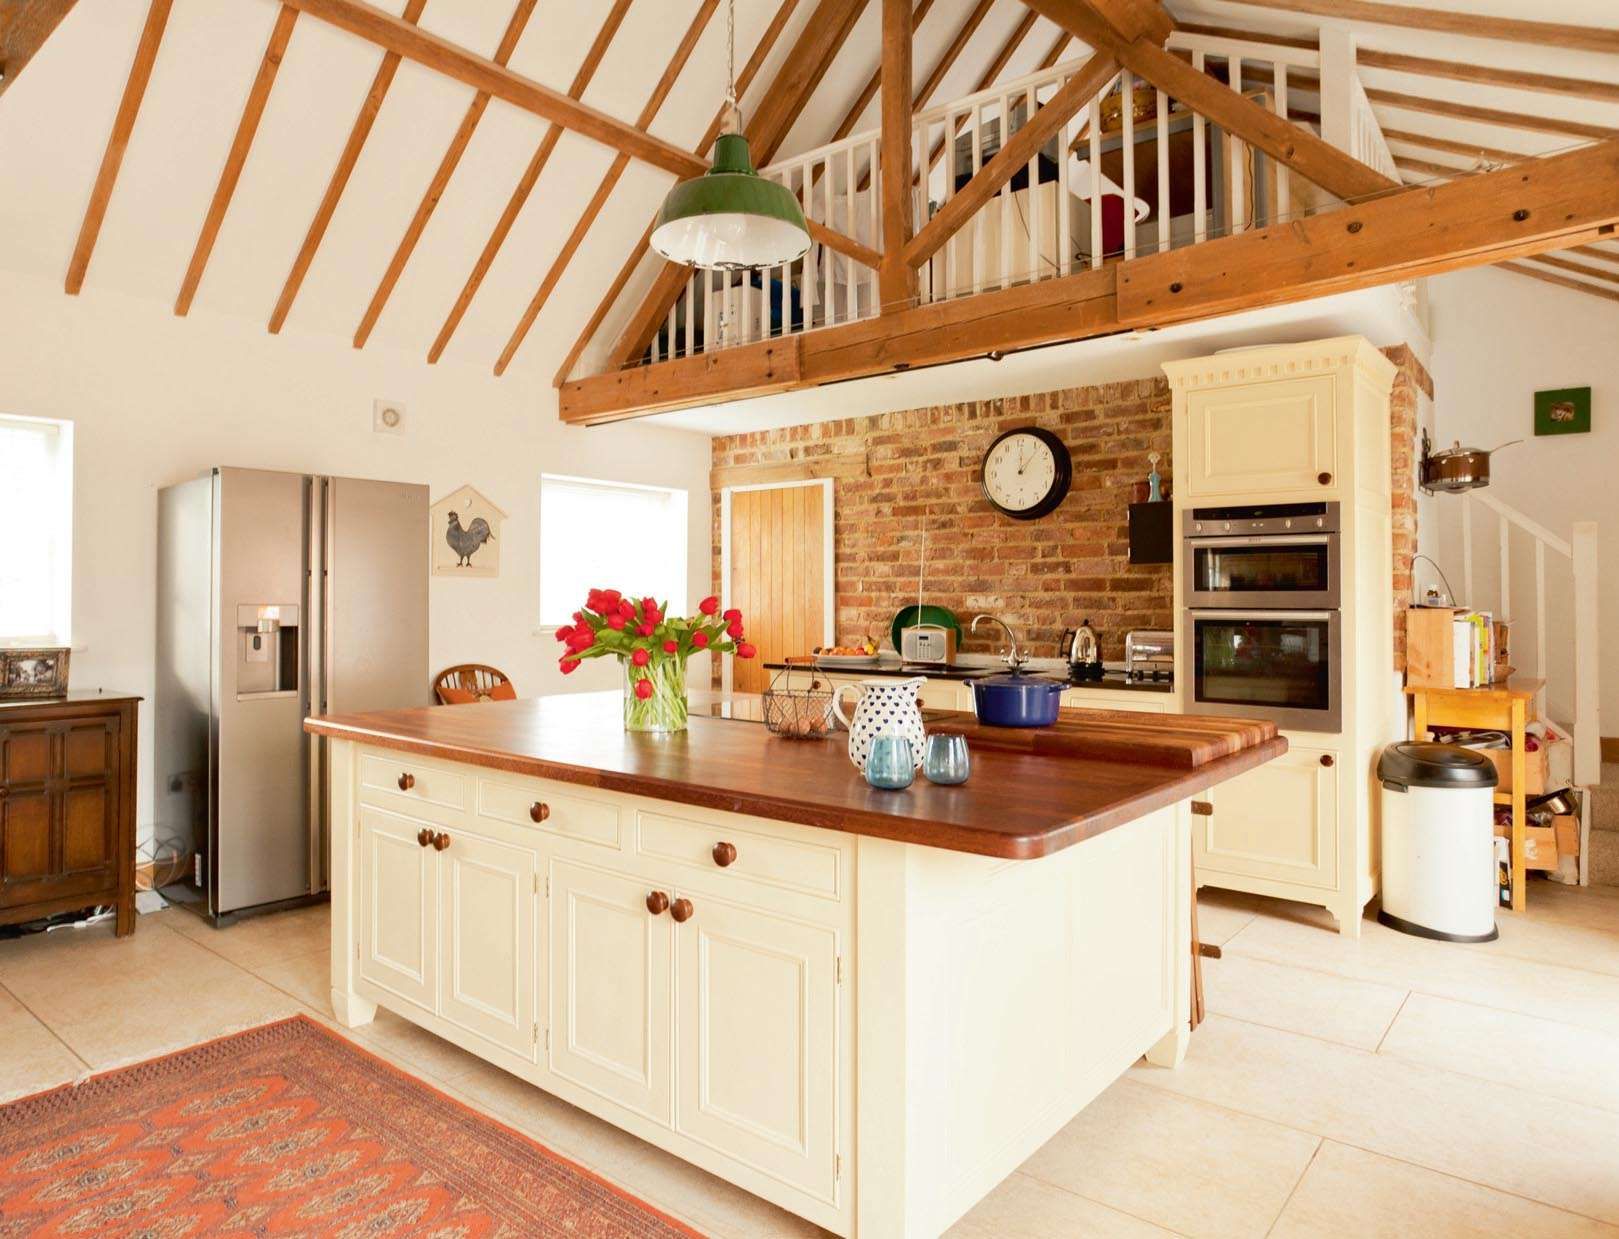 Barn Conversion Kitchen Ideas: 10 Designs For Lofty Spaces